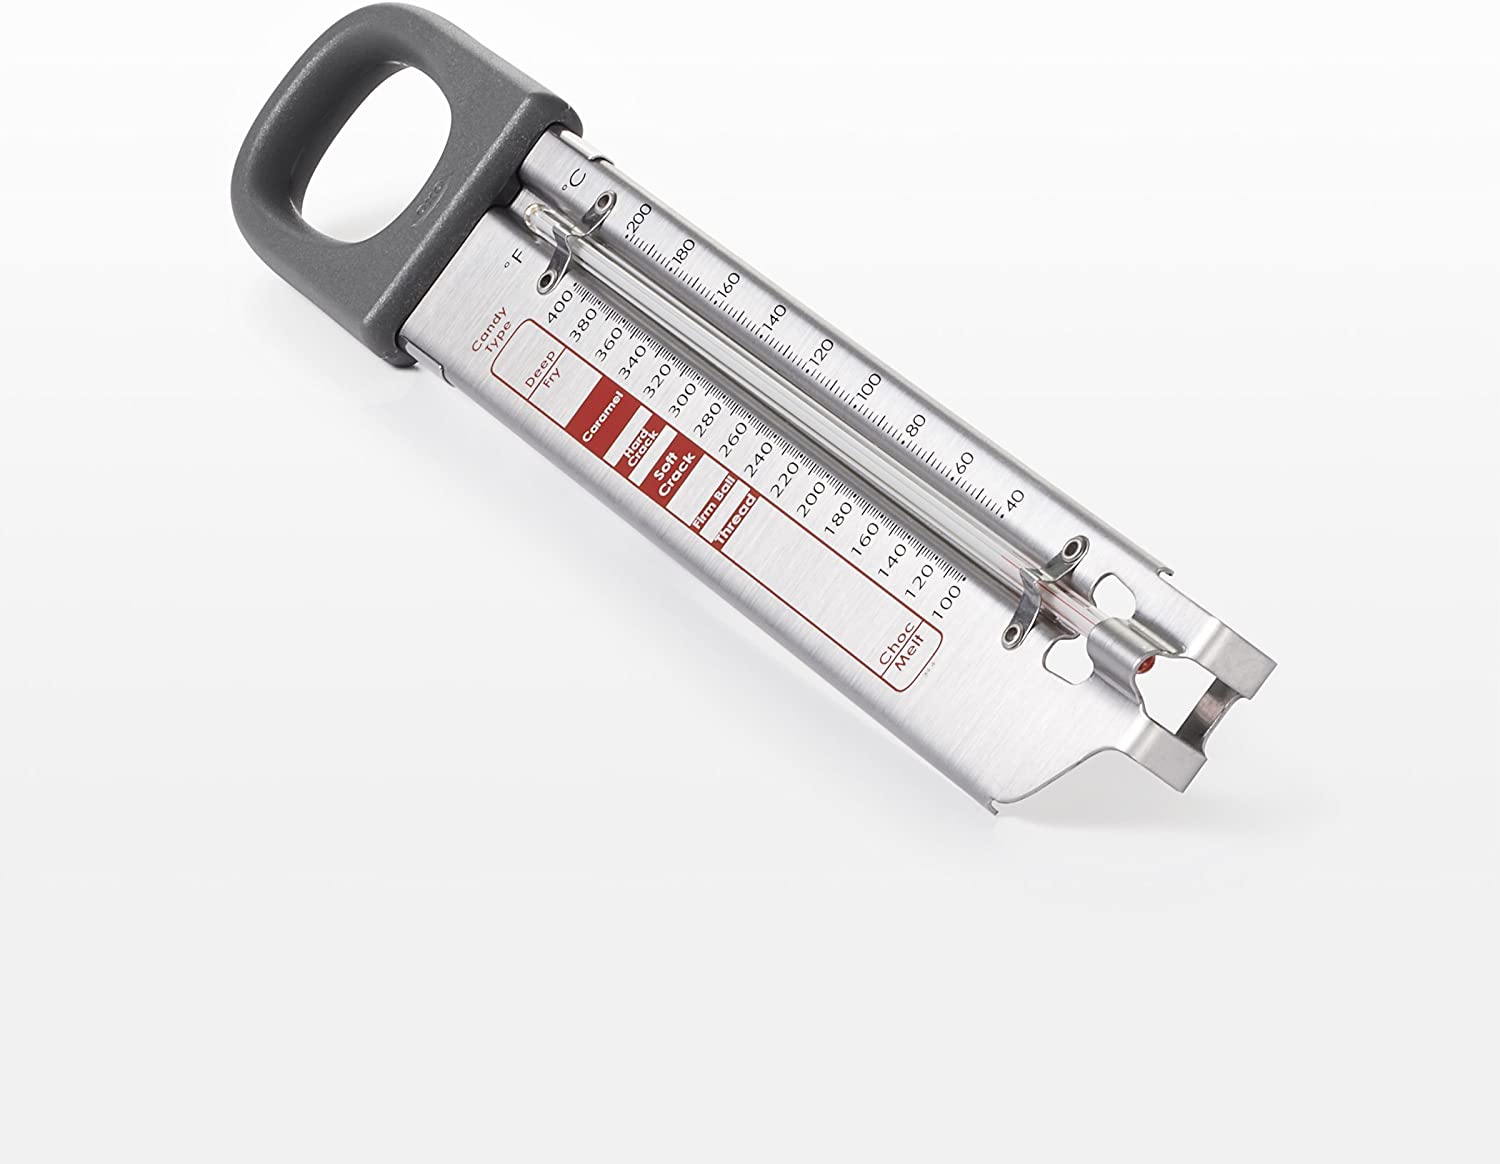 15 Best Candy Thermometers In 2023 To Get That Right Temperature